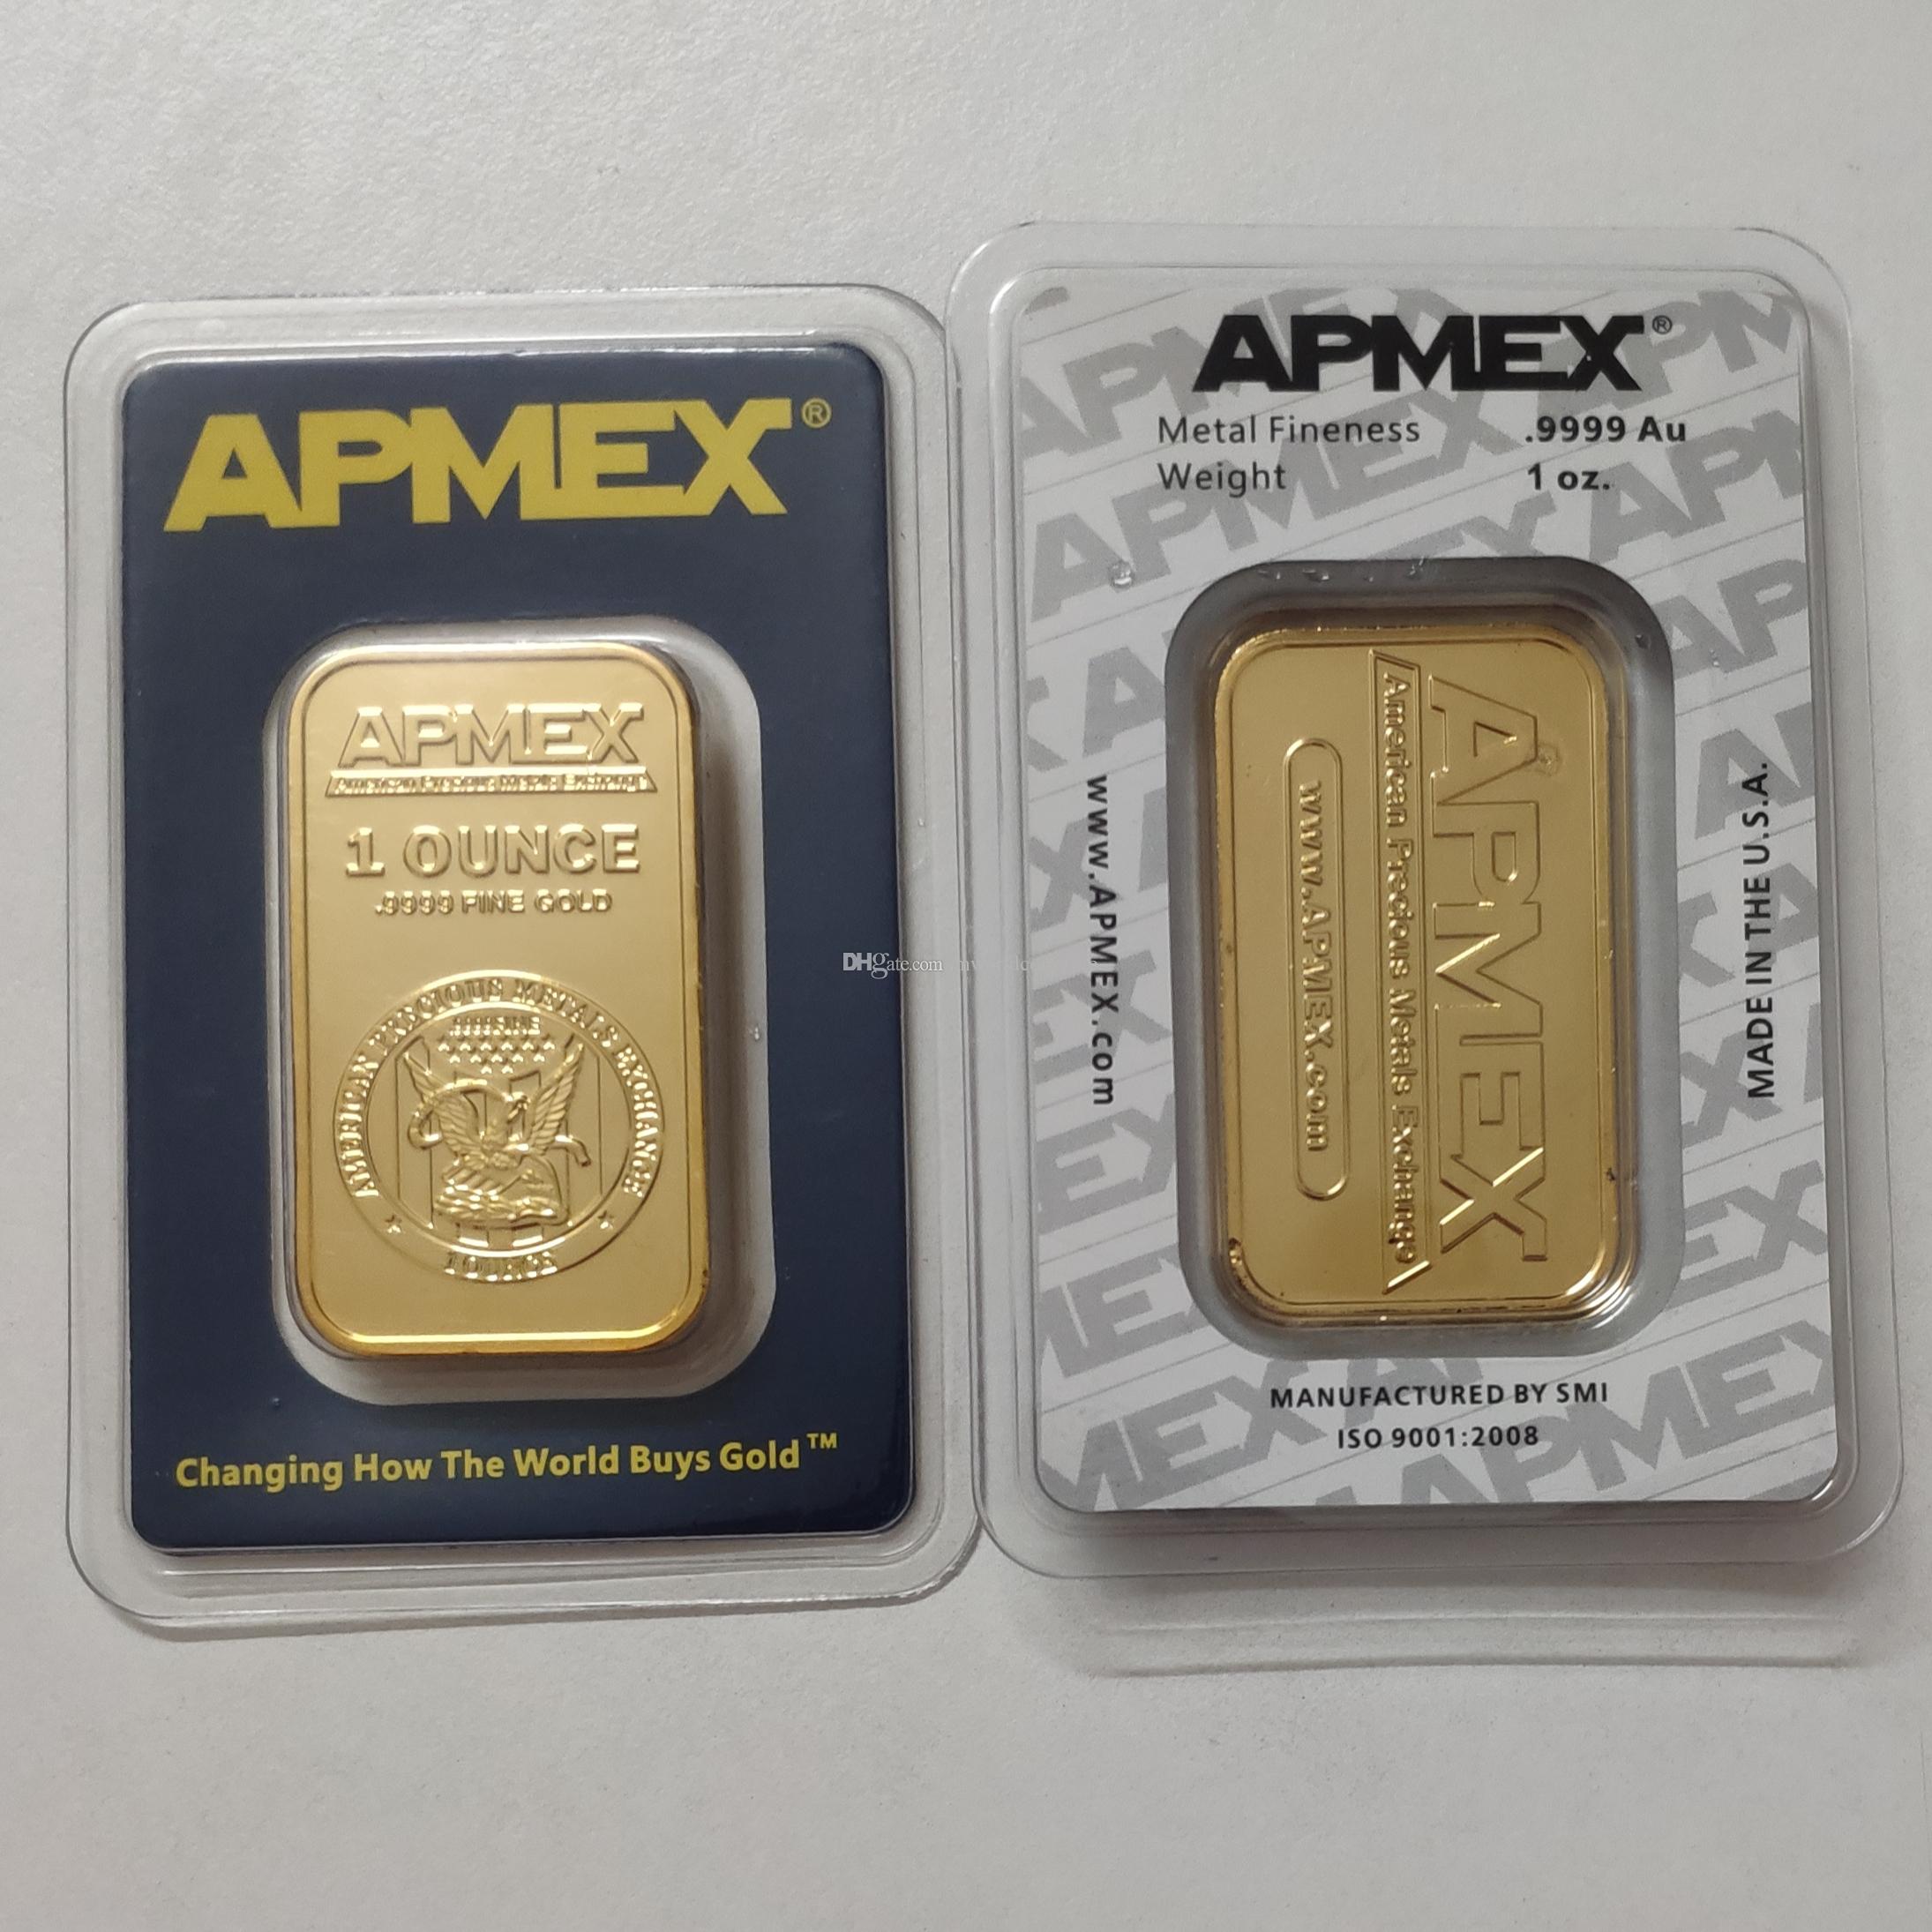 Apmex 1 troy gold plated bar Non-magnetic high quality Apmex Bullion bar Arts Collection Gifts